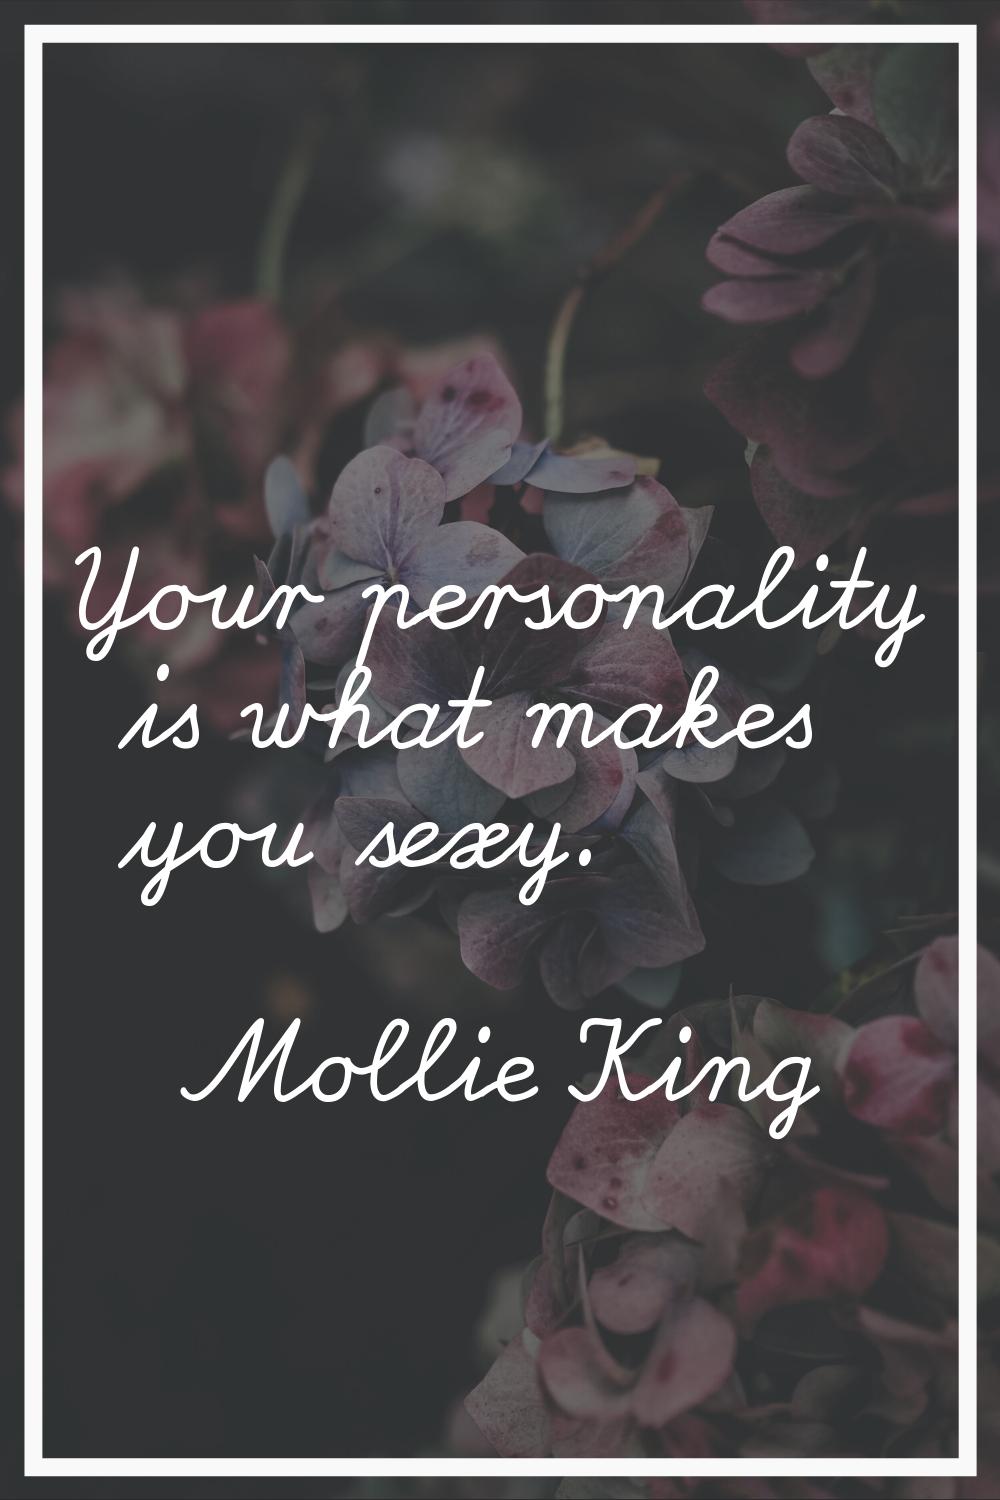 Your personality is what makes you sexy.